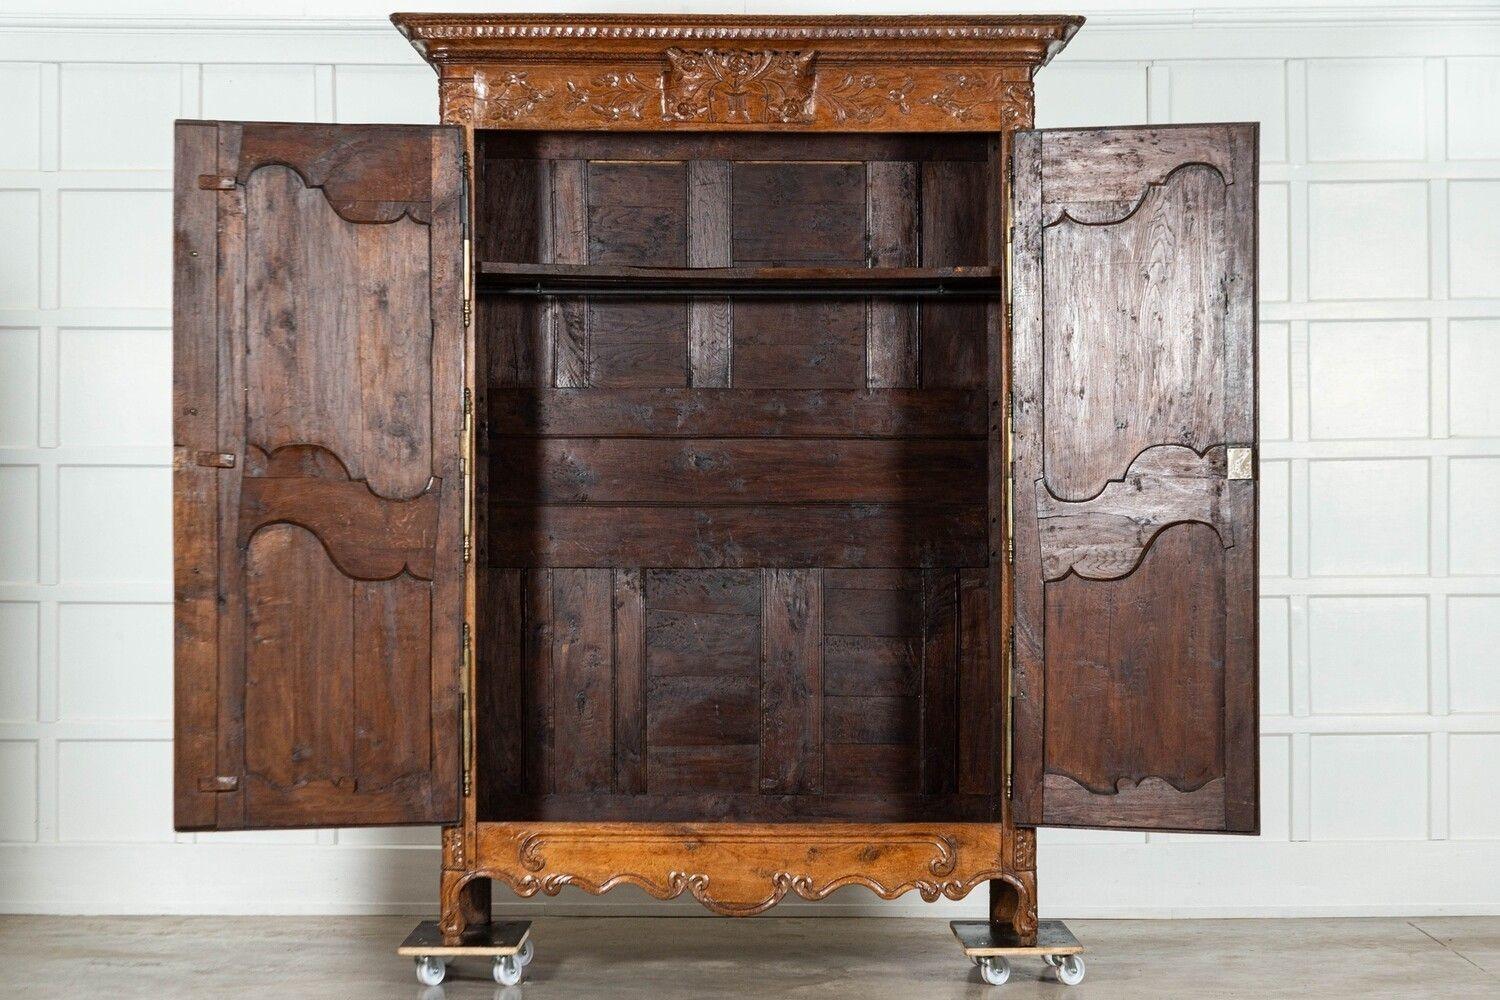 circa 1790
Large 18thC French Carved Walnut Armoire
Exceptional quality
sku 1771
W167 x D64 x H230 cm
Weight 135 kg